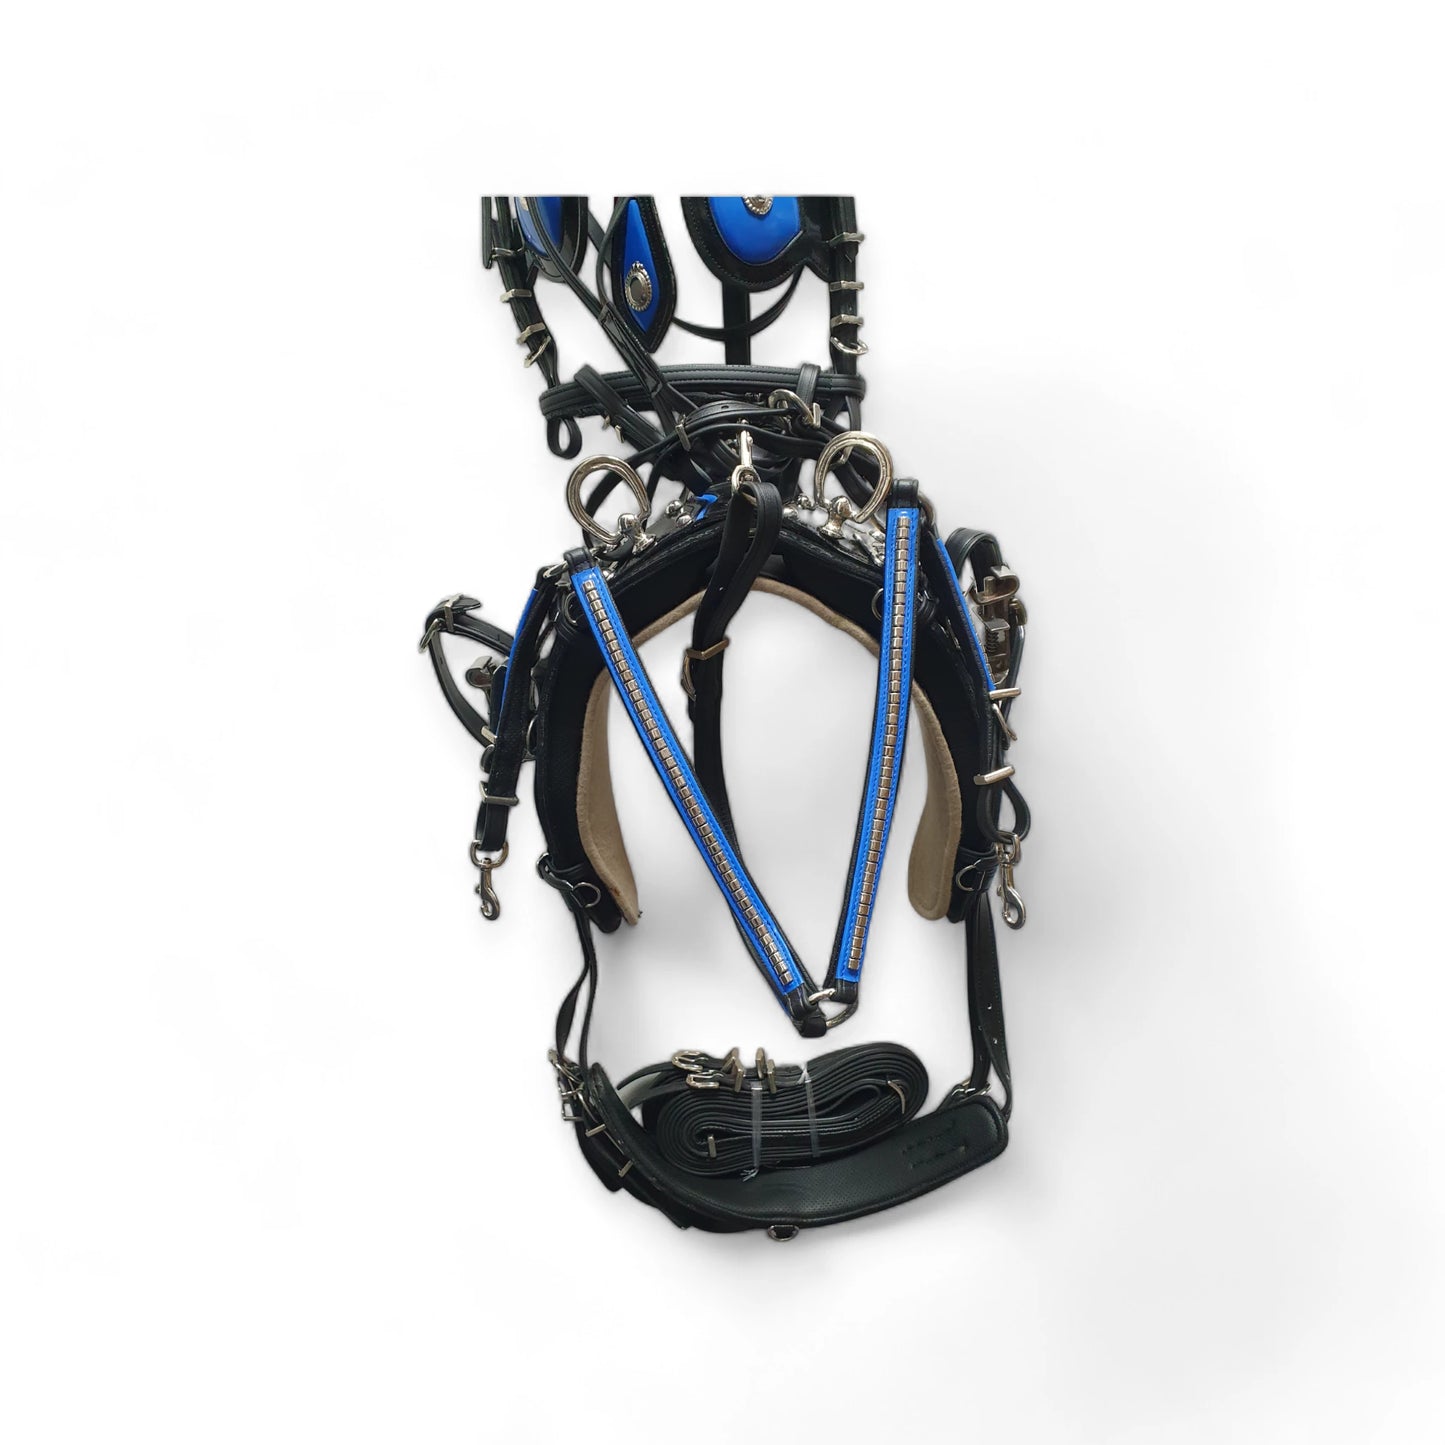 Quick Hitch Harness Light Trade set Black and Blue Colour